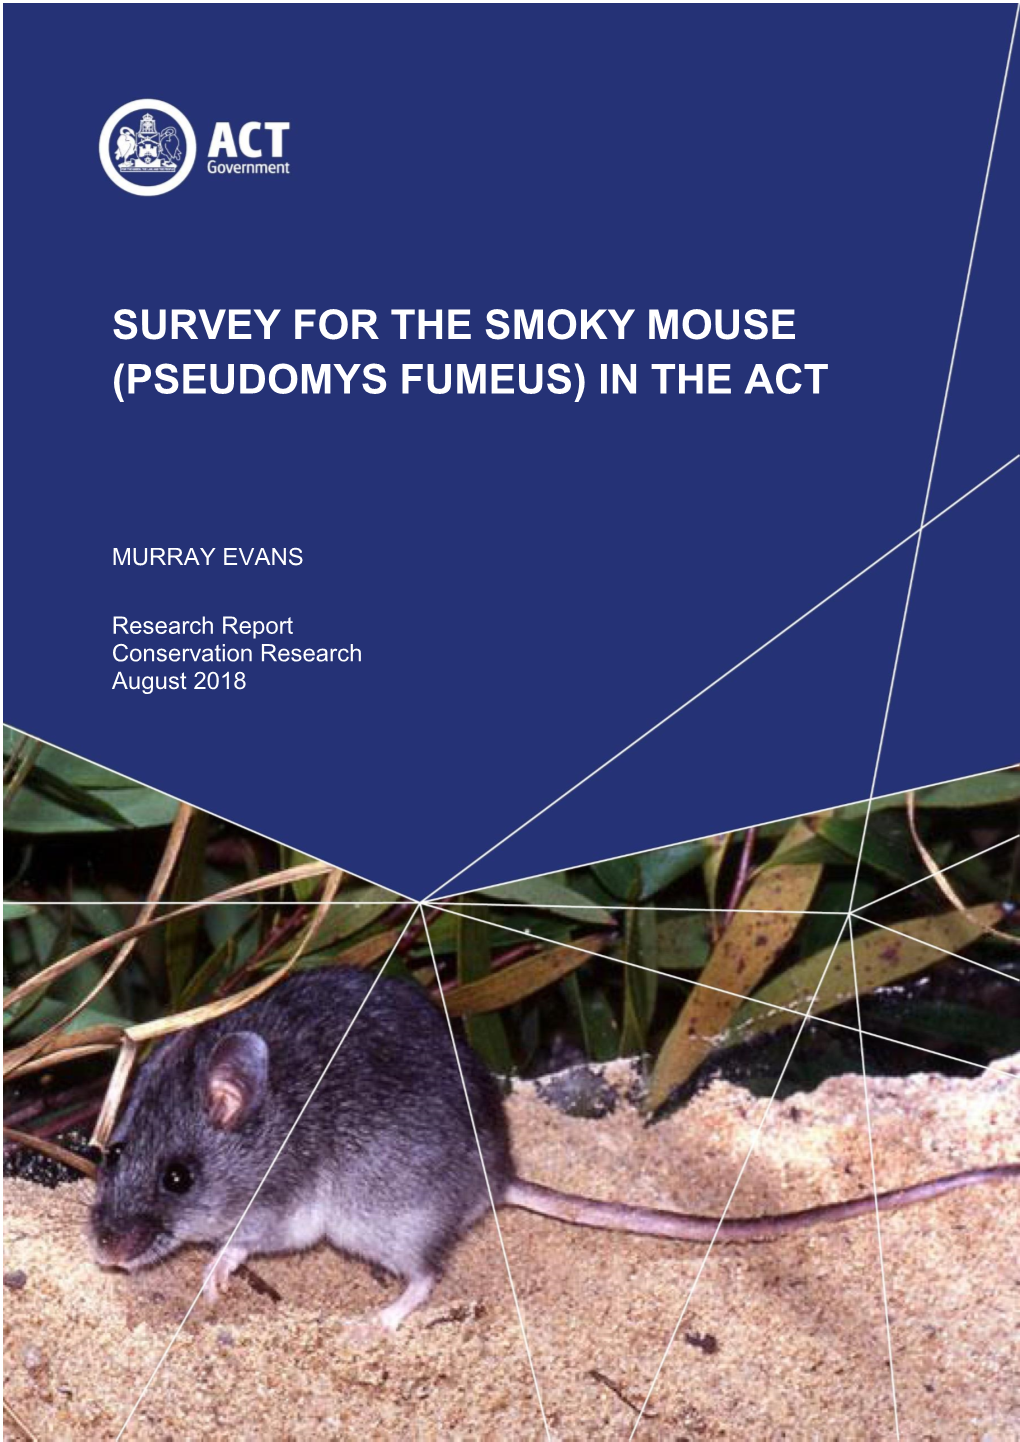 Survey for the Smoky Mouse in The